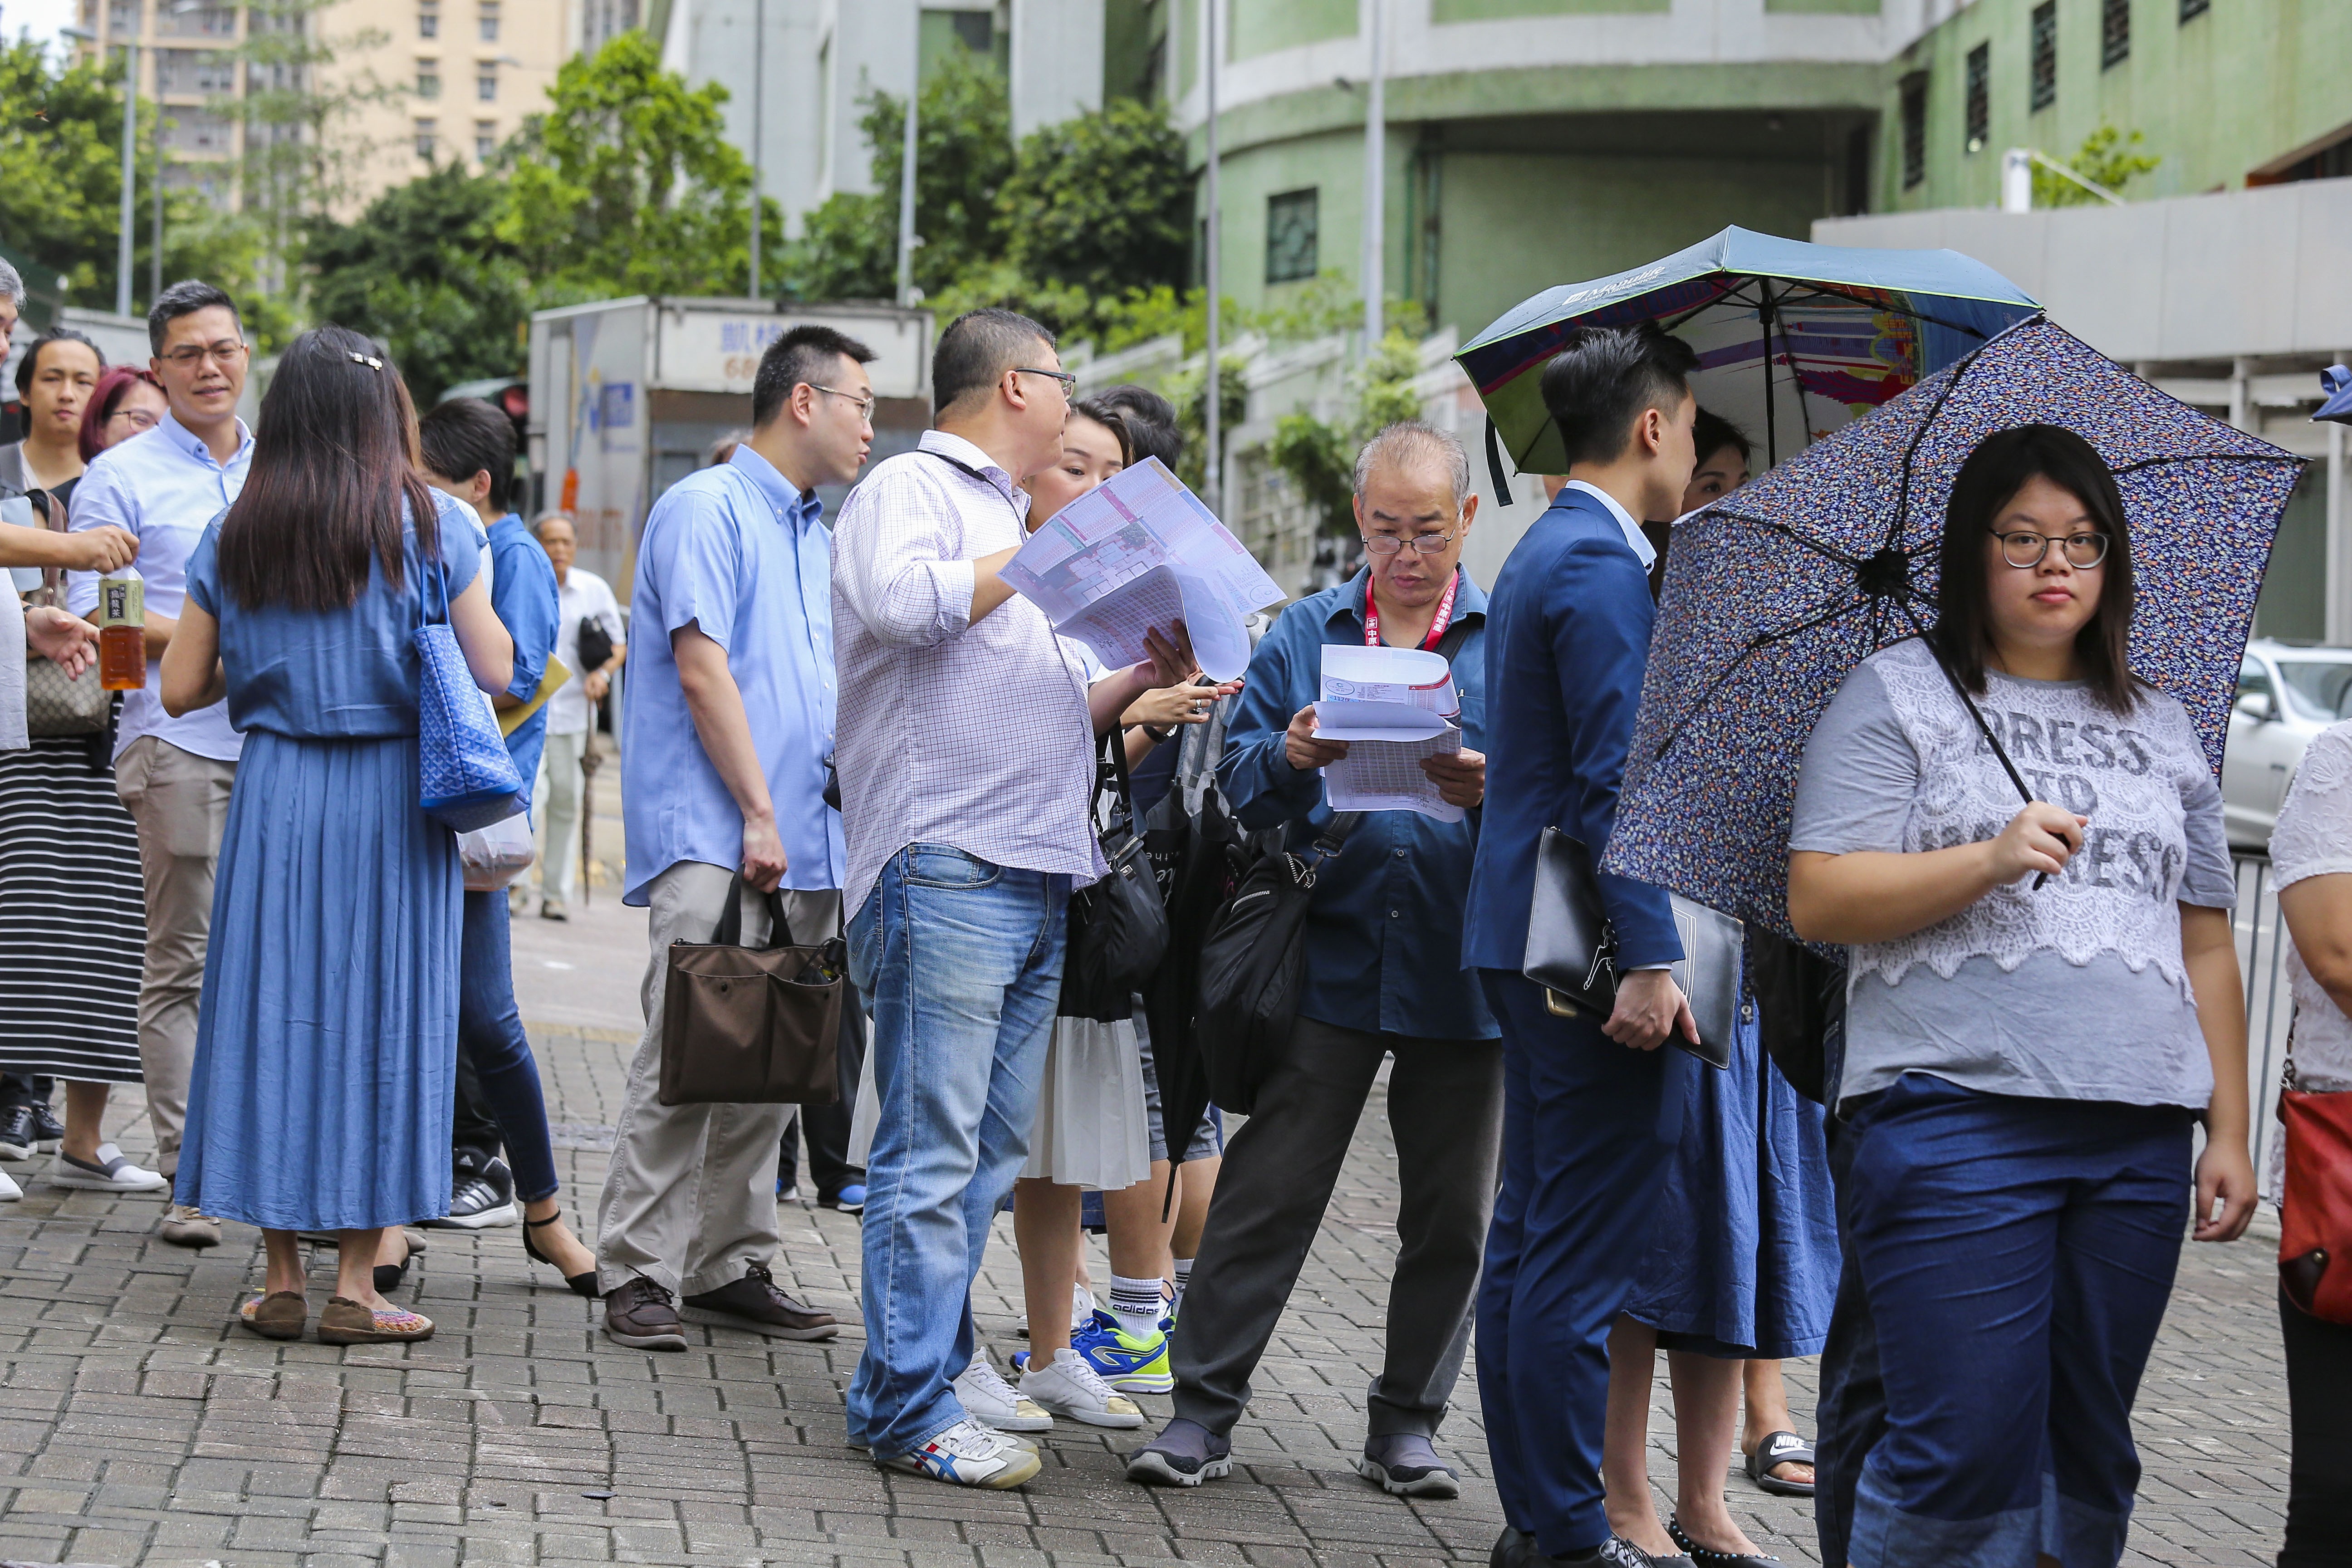 Potential buyers faced heavy downpours and gusty winds as they queued up for the two property sales. Photo: Dickson Lee